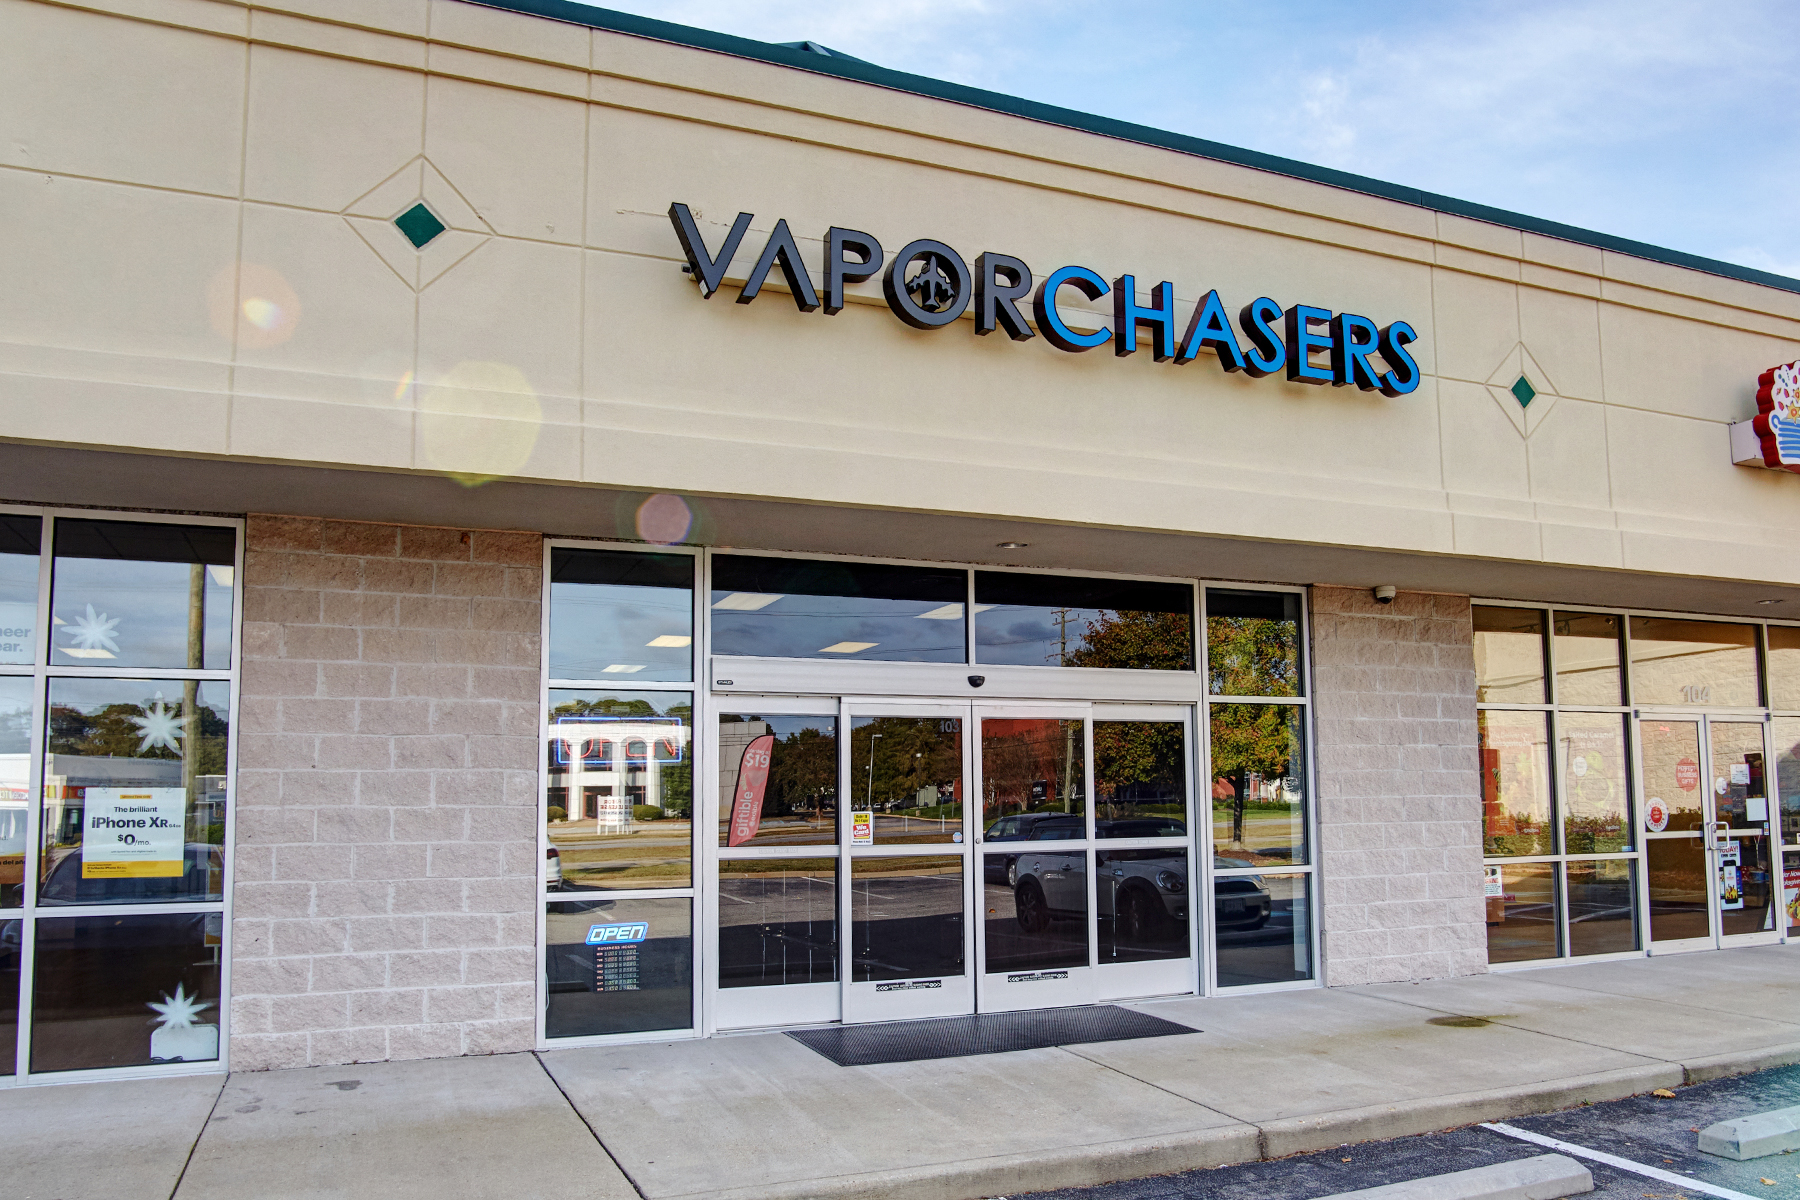 Vapor Chasers